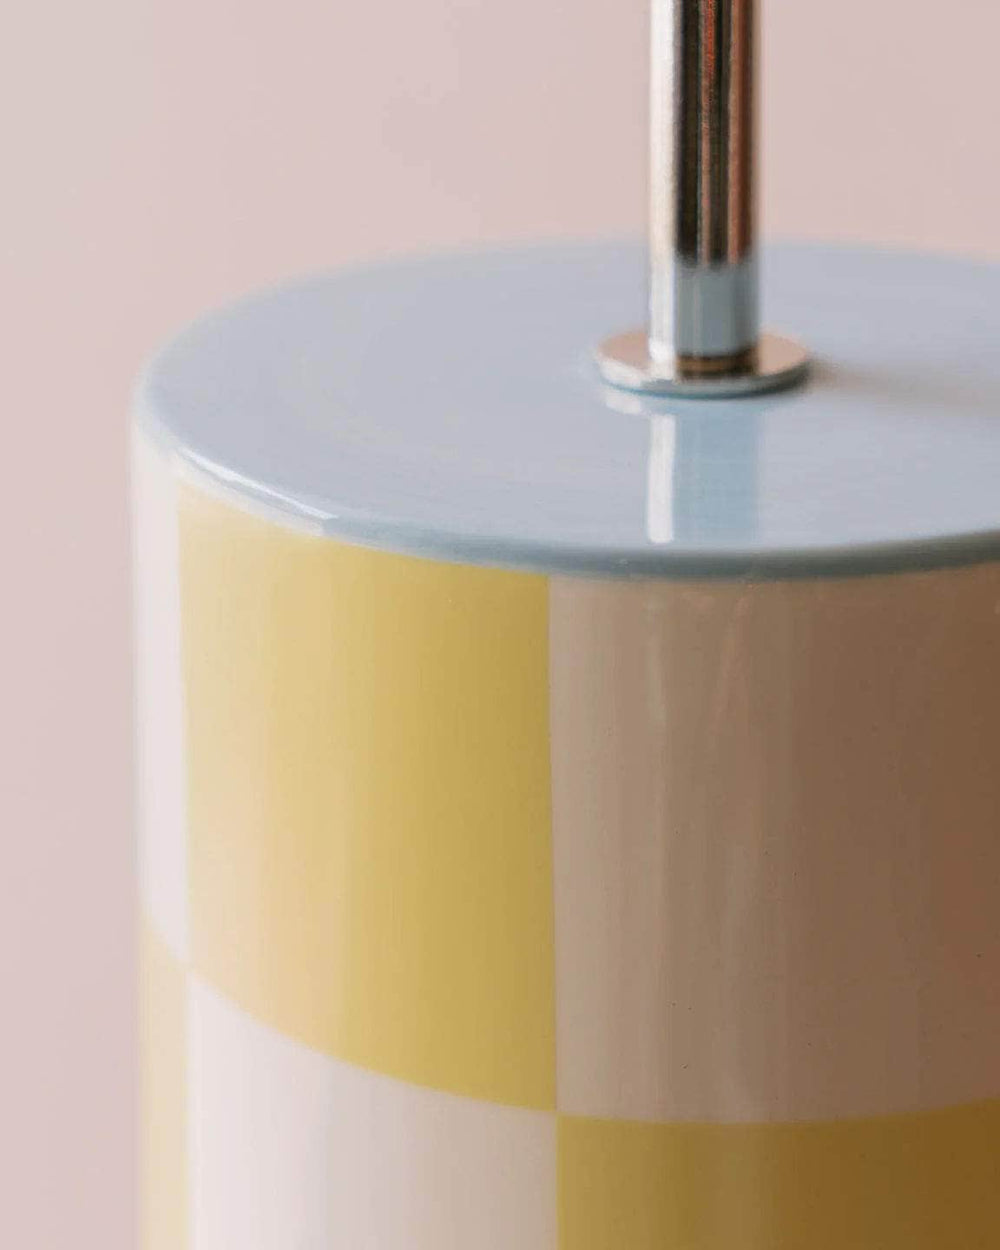 Ombrellina Bright Yellow + Charcoal Table Lamp